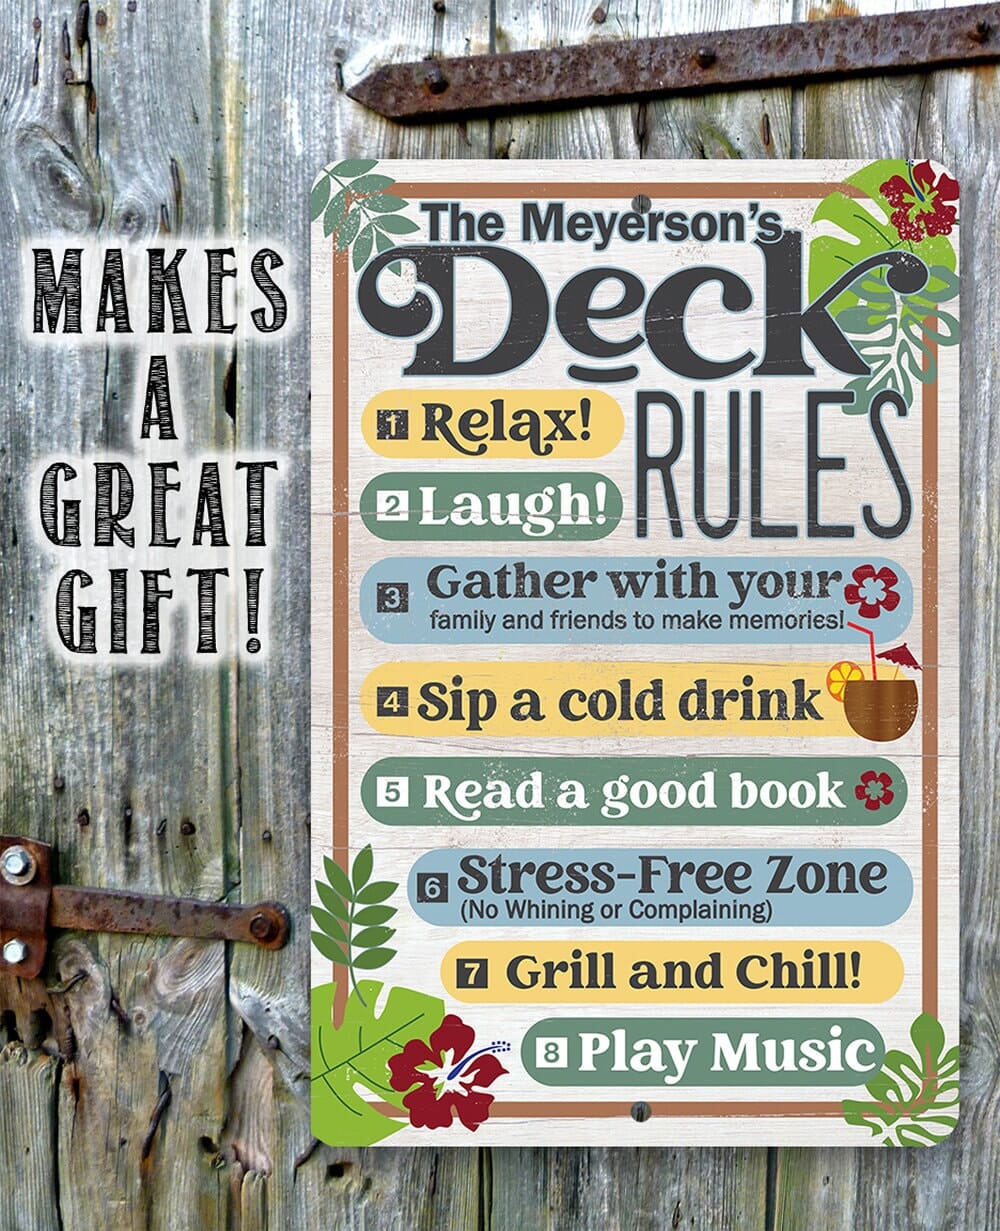 Personalized - Deck Rules Relax Laugh Gather With Your Family - 8" x 12" or 12" x 18" Aluminum Tin Awesome Metal Poster Lone Star Art 